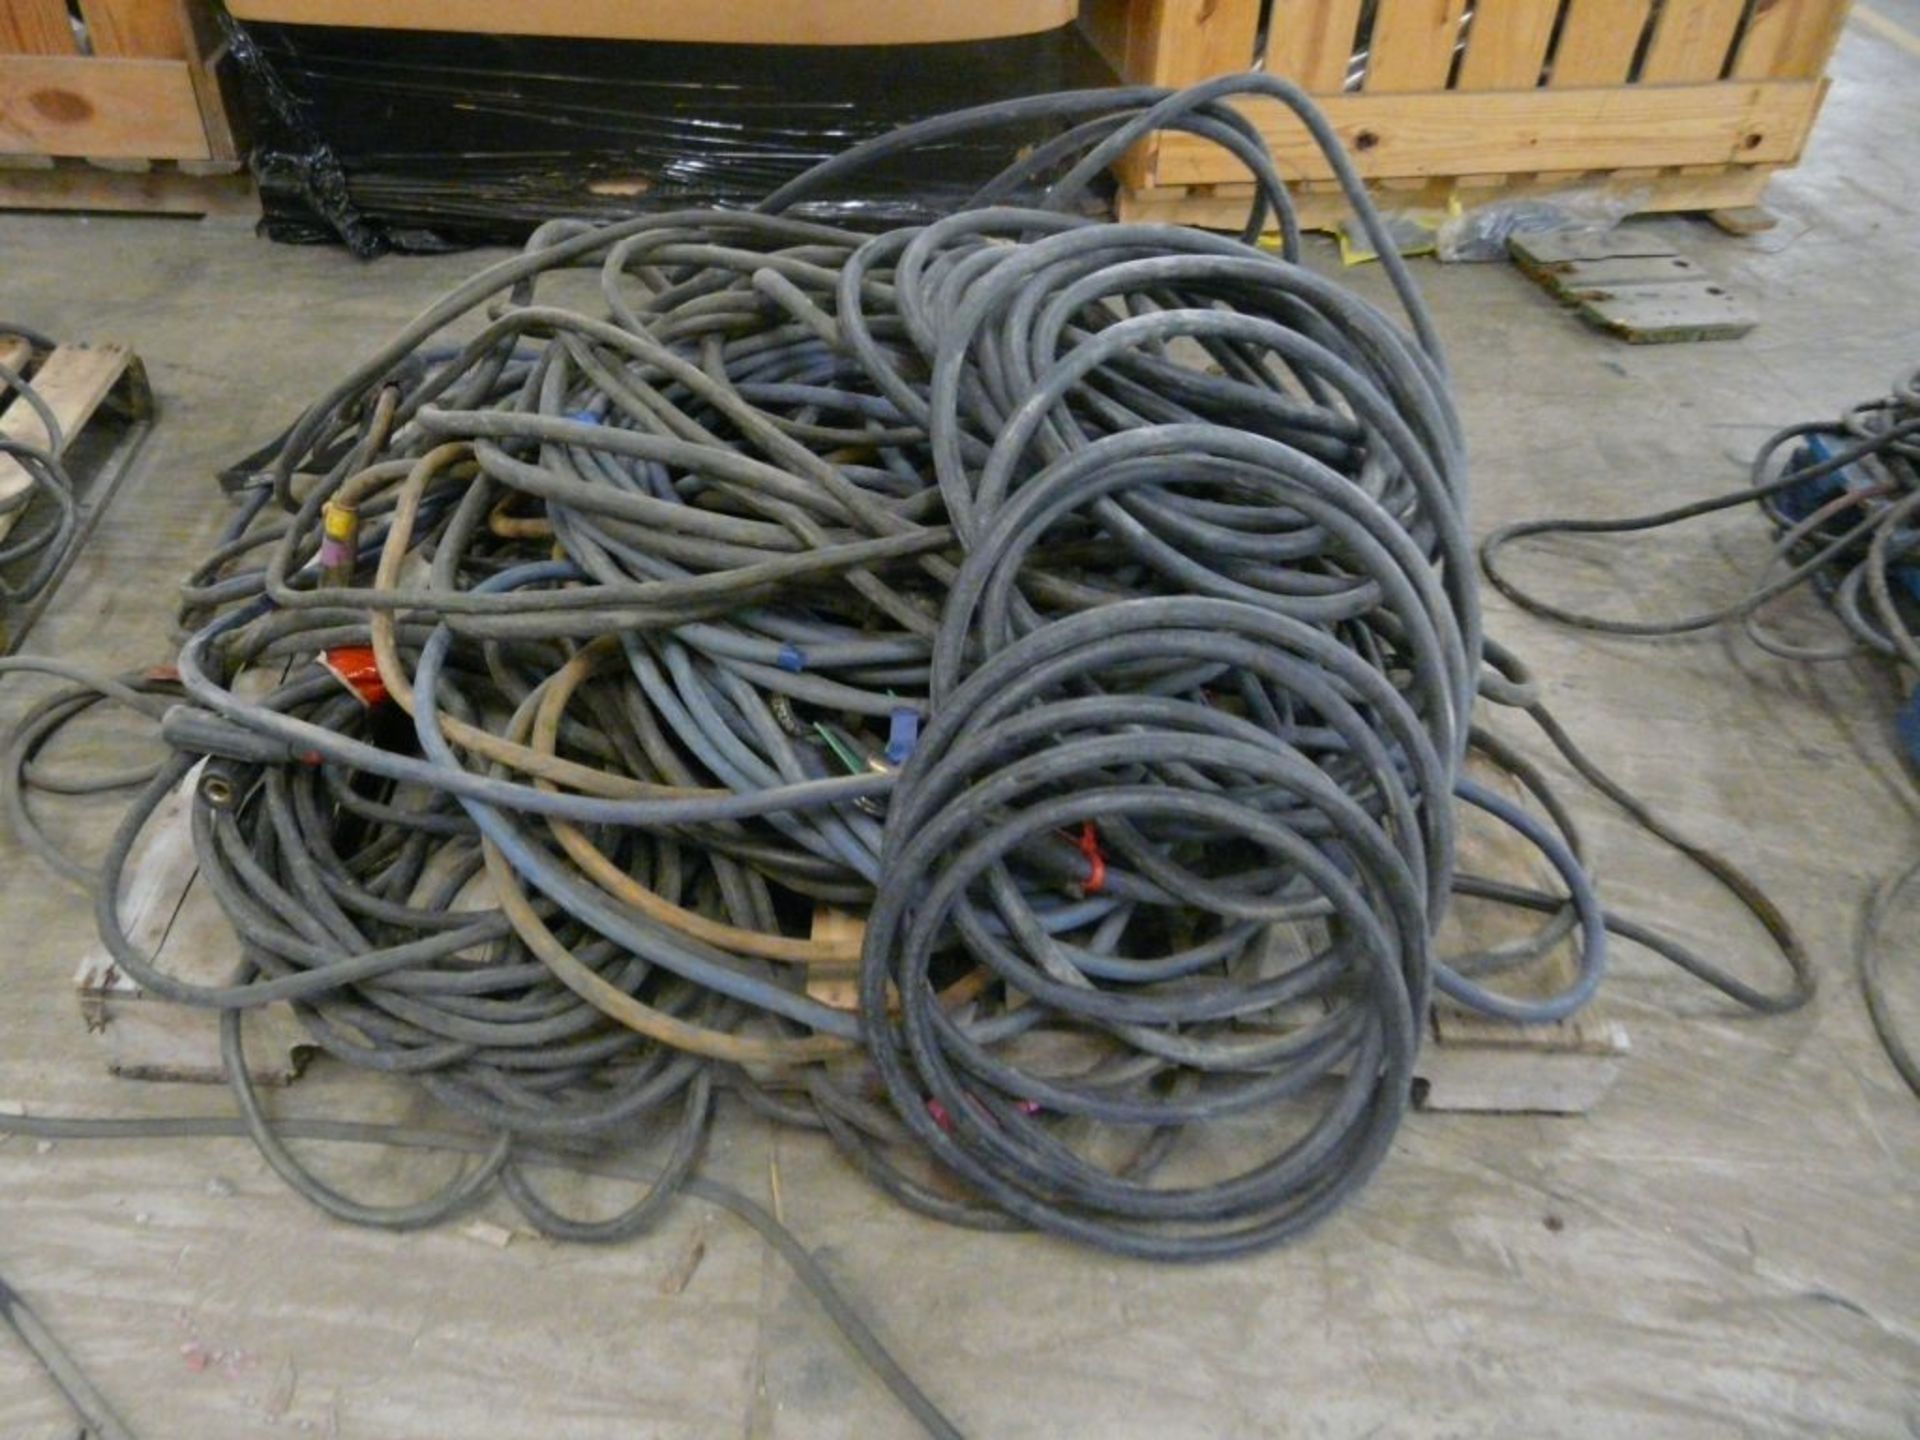 Lot of (10) 50' Welding Leads | 362 lbs; Majority are 2/0 - Image 3 of 3